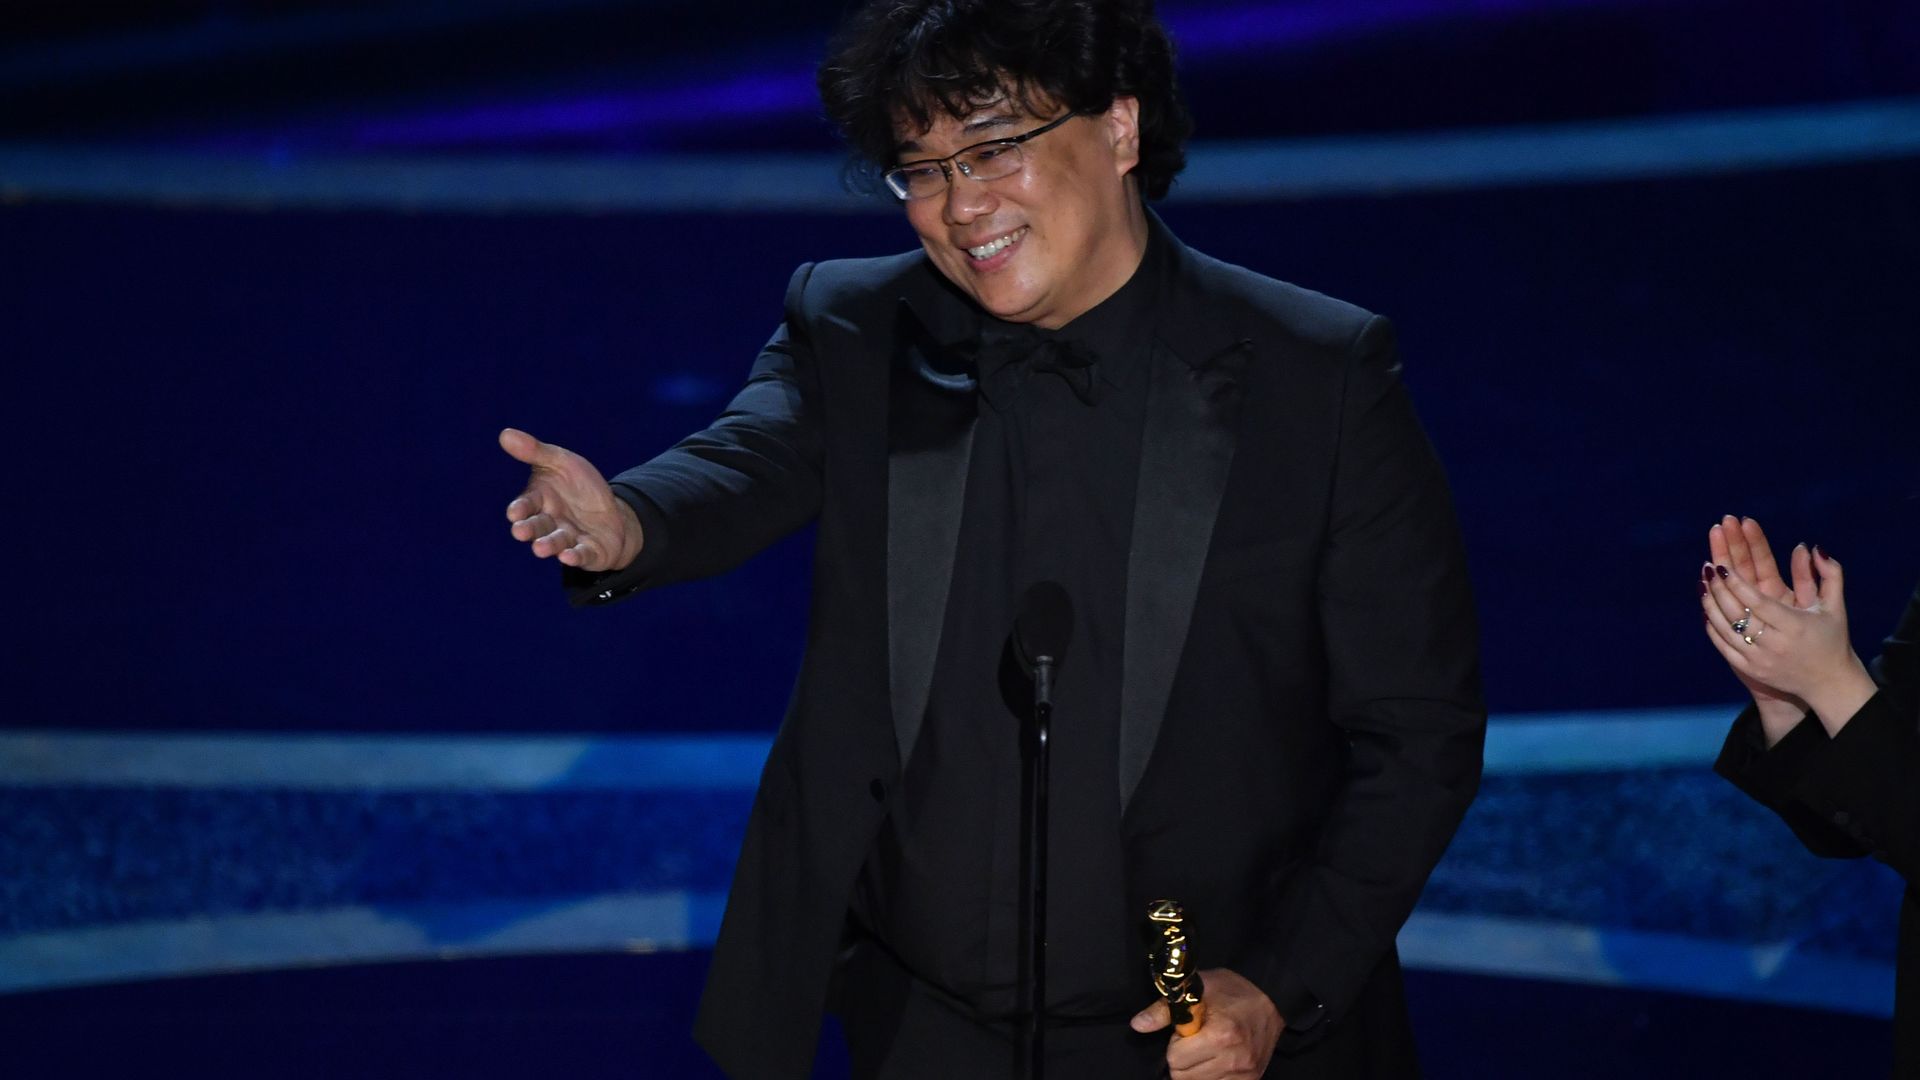 Bong Joon Ho accepts the award for Best Director for "Parasite" during the 92nd Oscars at the Dolby Theatre in Hollywood, California on February 9, 2020.